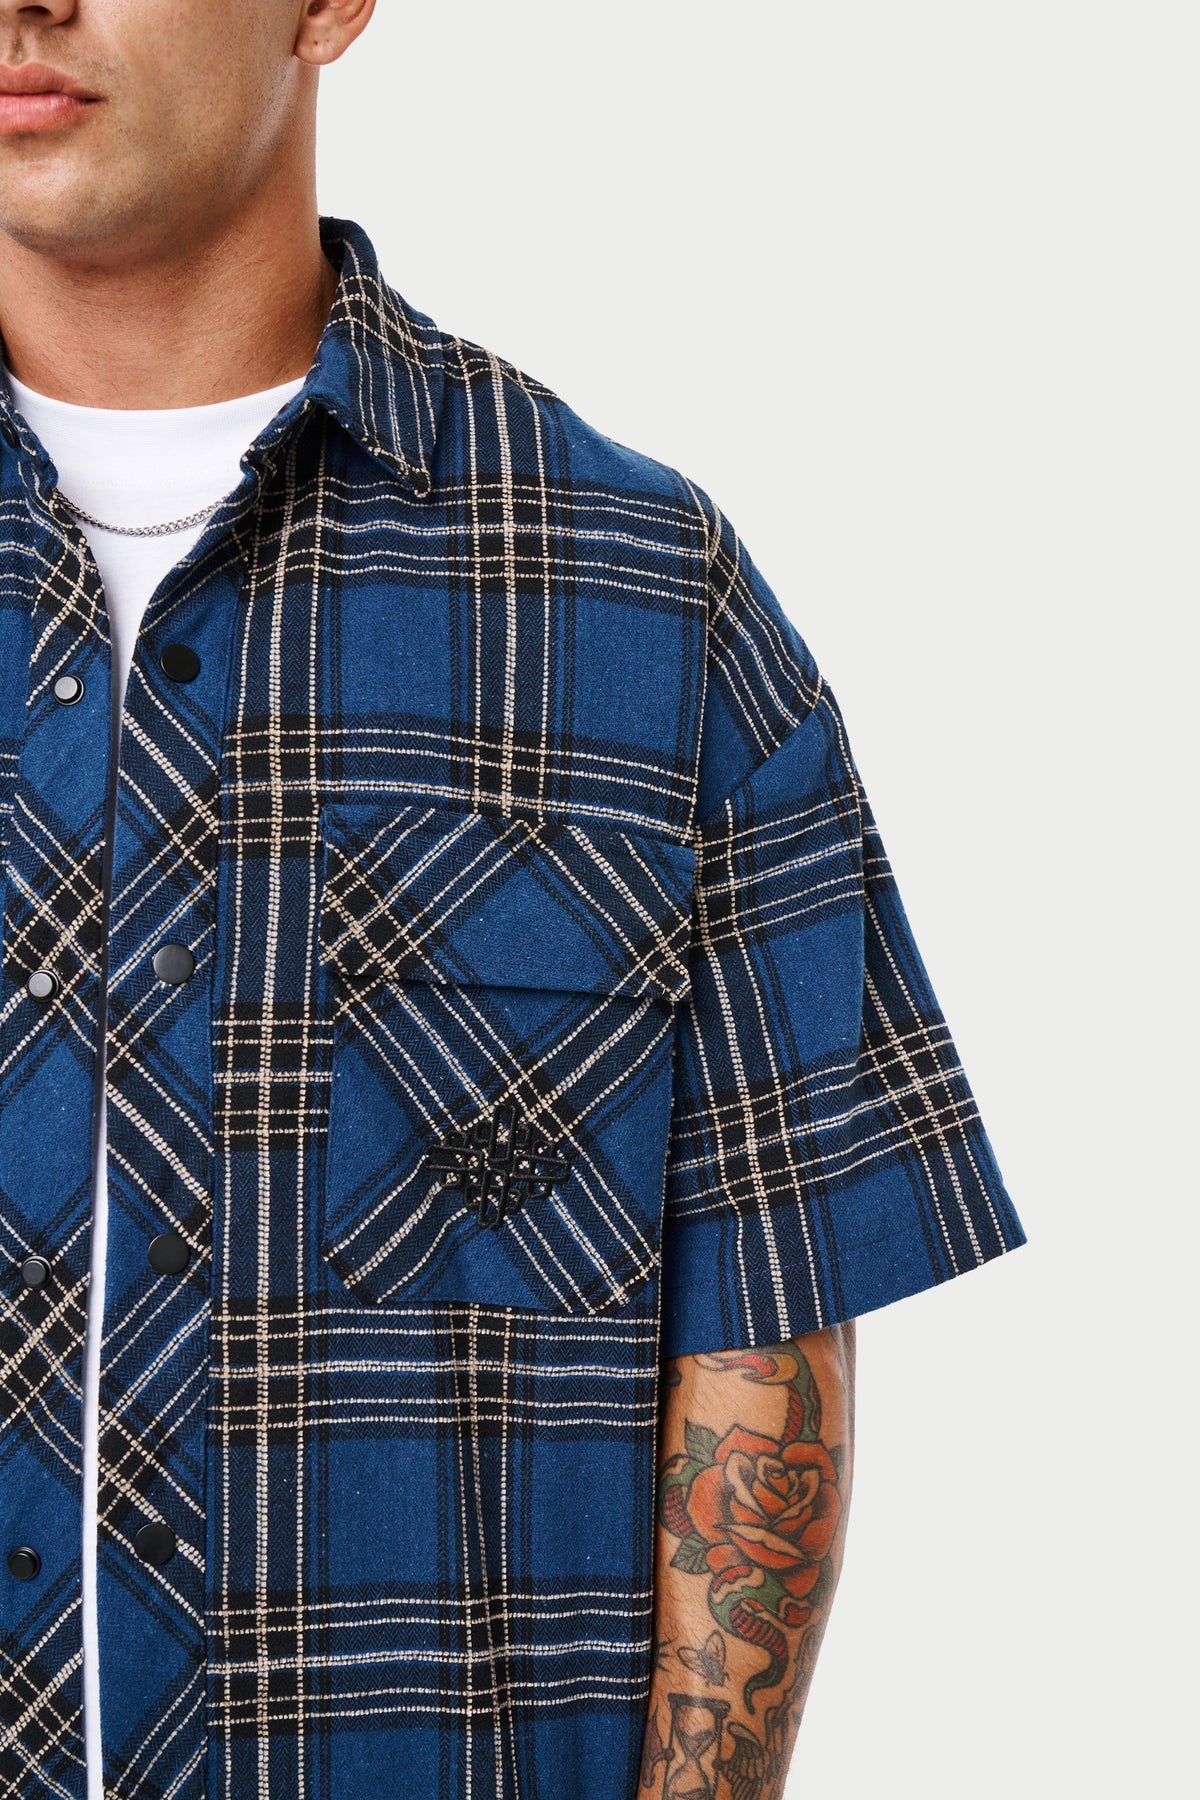 EMBLEM FLANNEL OVERSHIRT - BLUE – The Couture Club